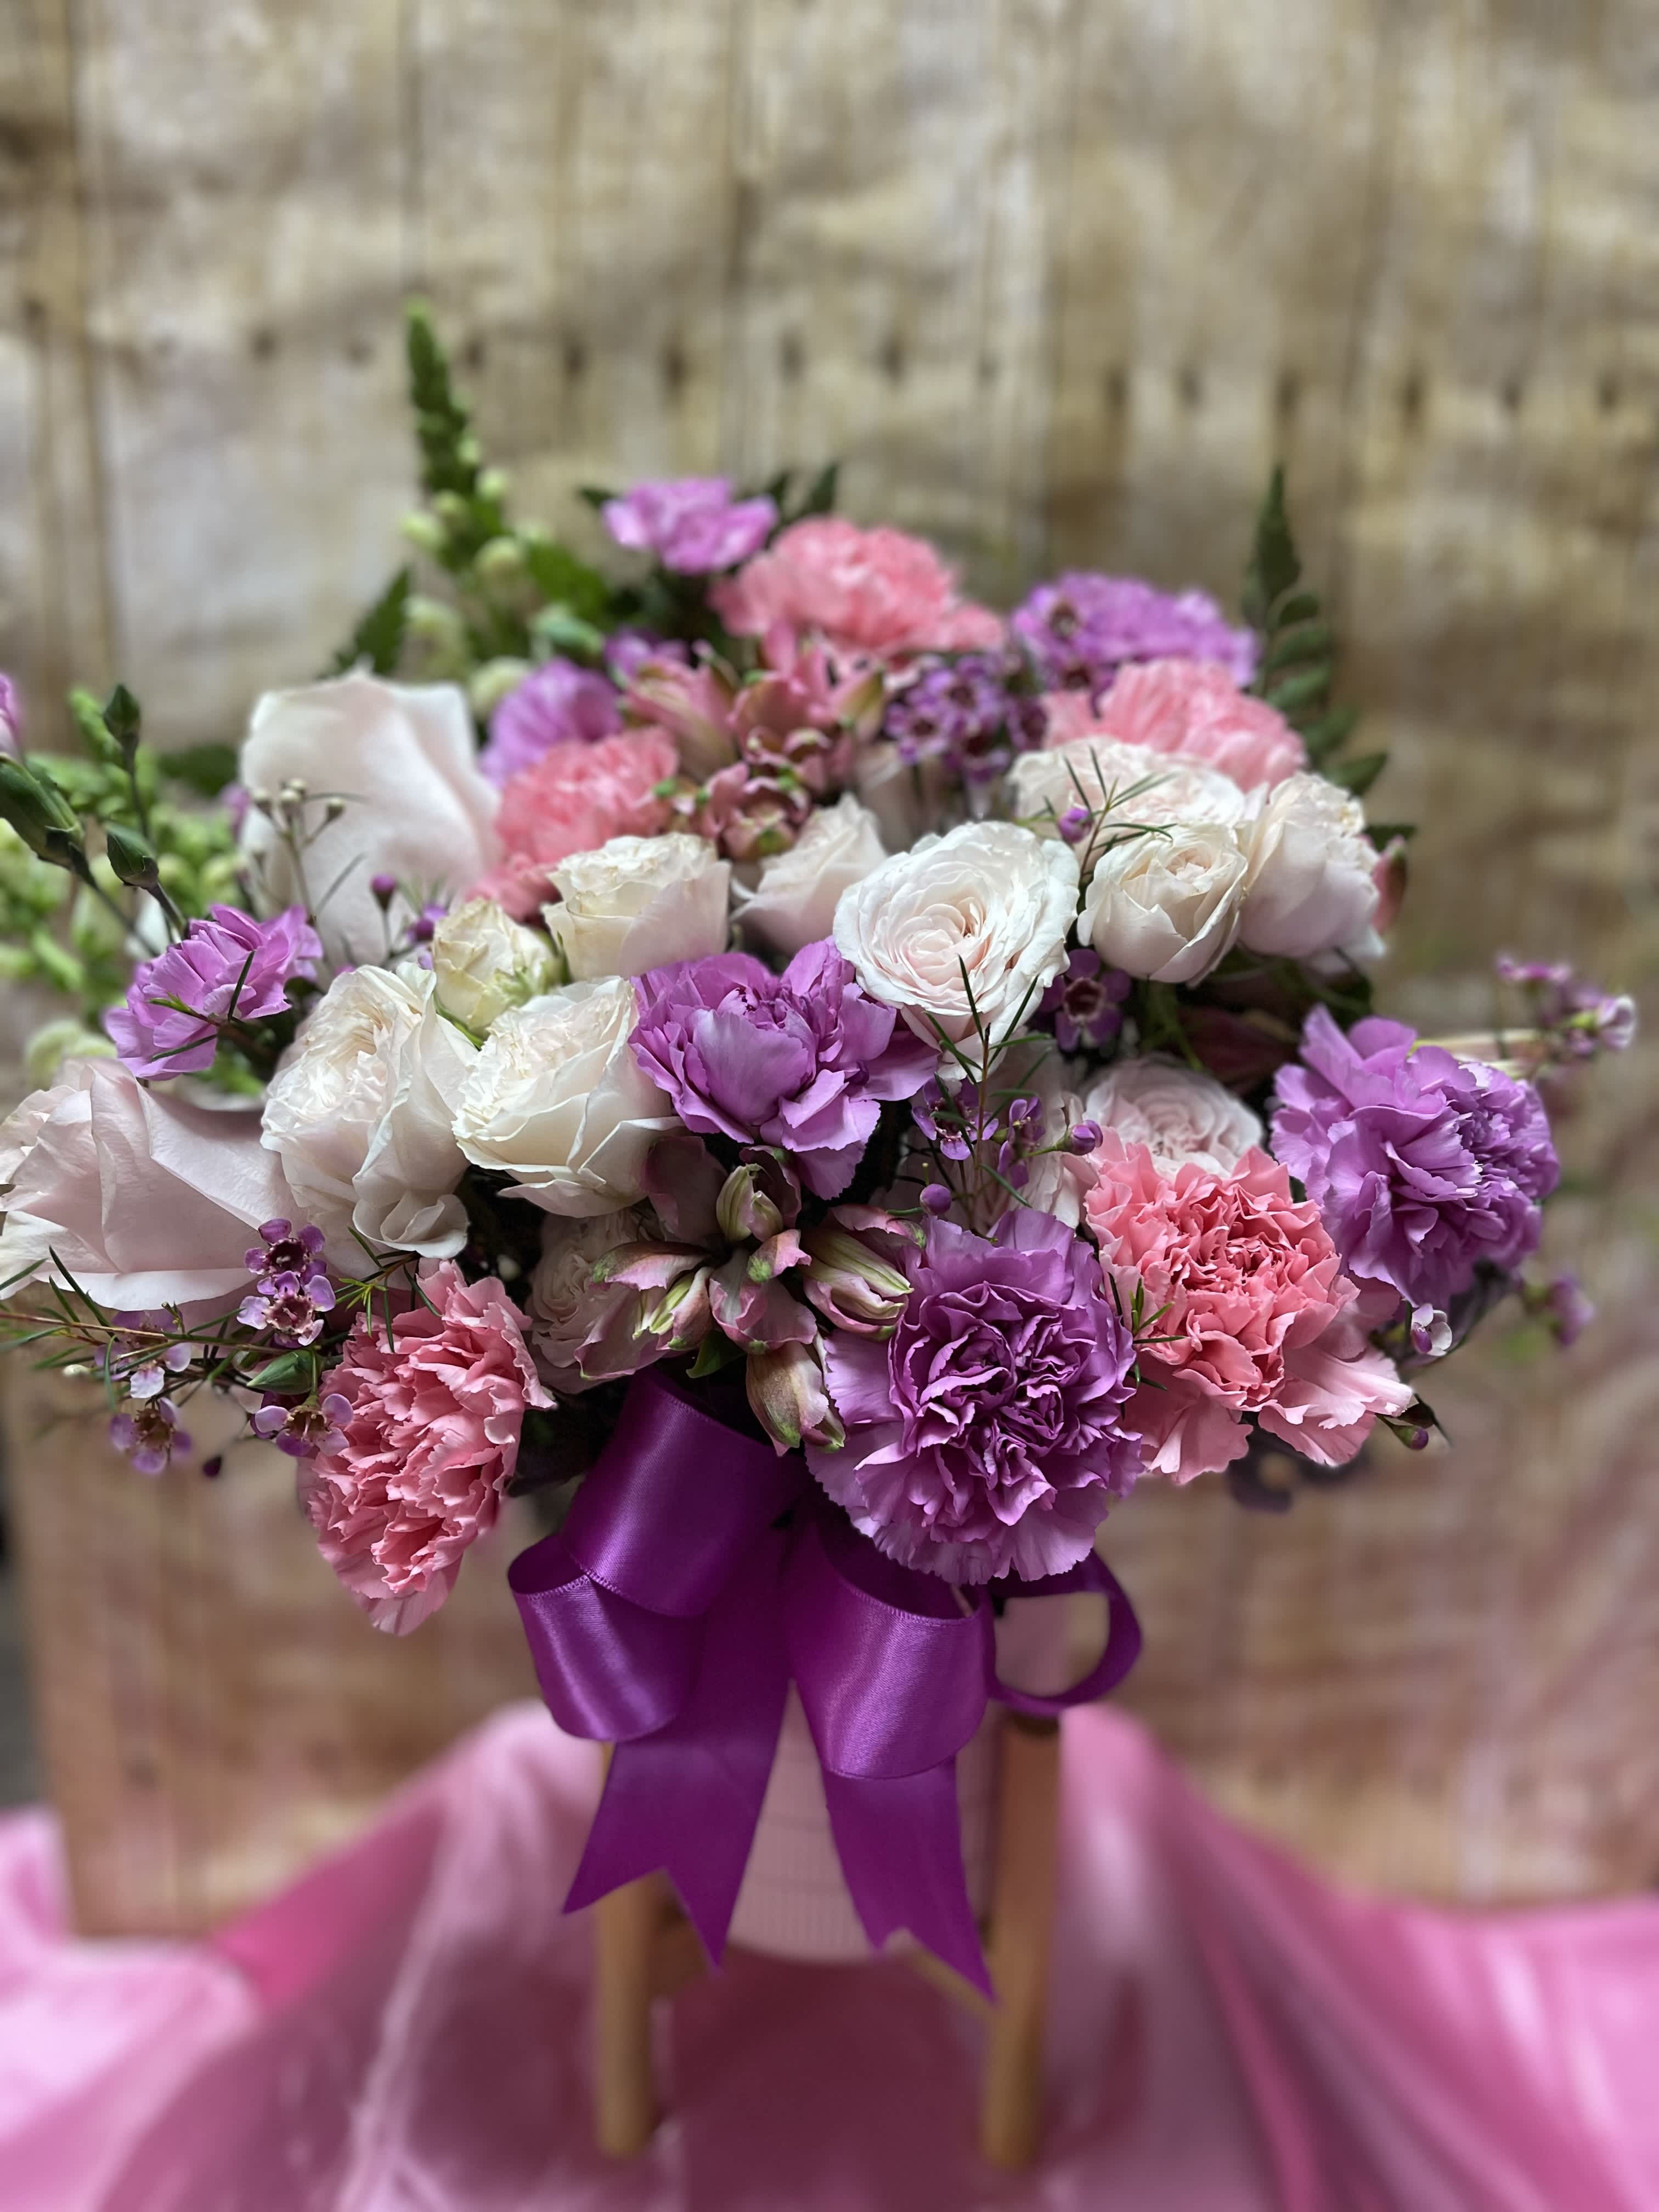 MY SWEET LOVE  - AN ARRANGEMENT AS SWEET AAS ITS COLORS! WITH A CUTE AND DELICATE MESSAGE OF LOVE!!